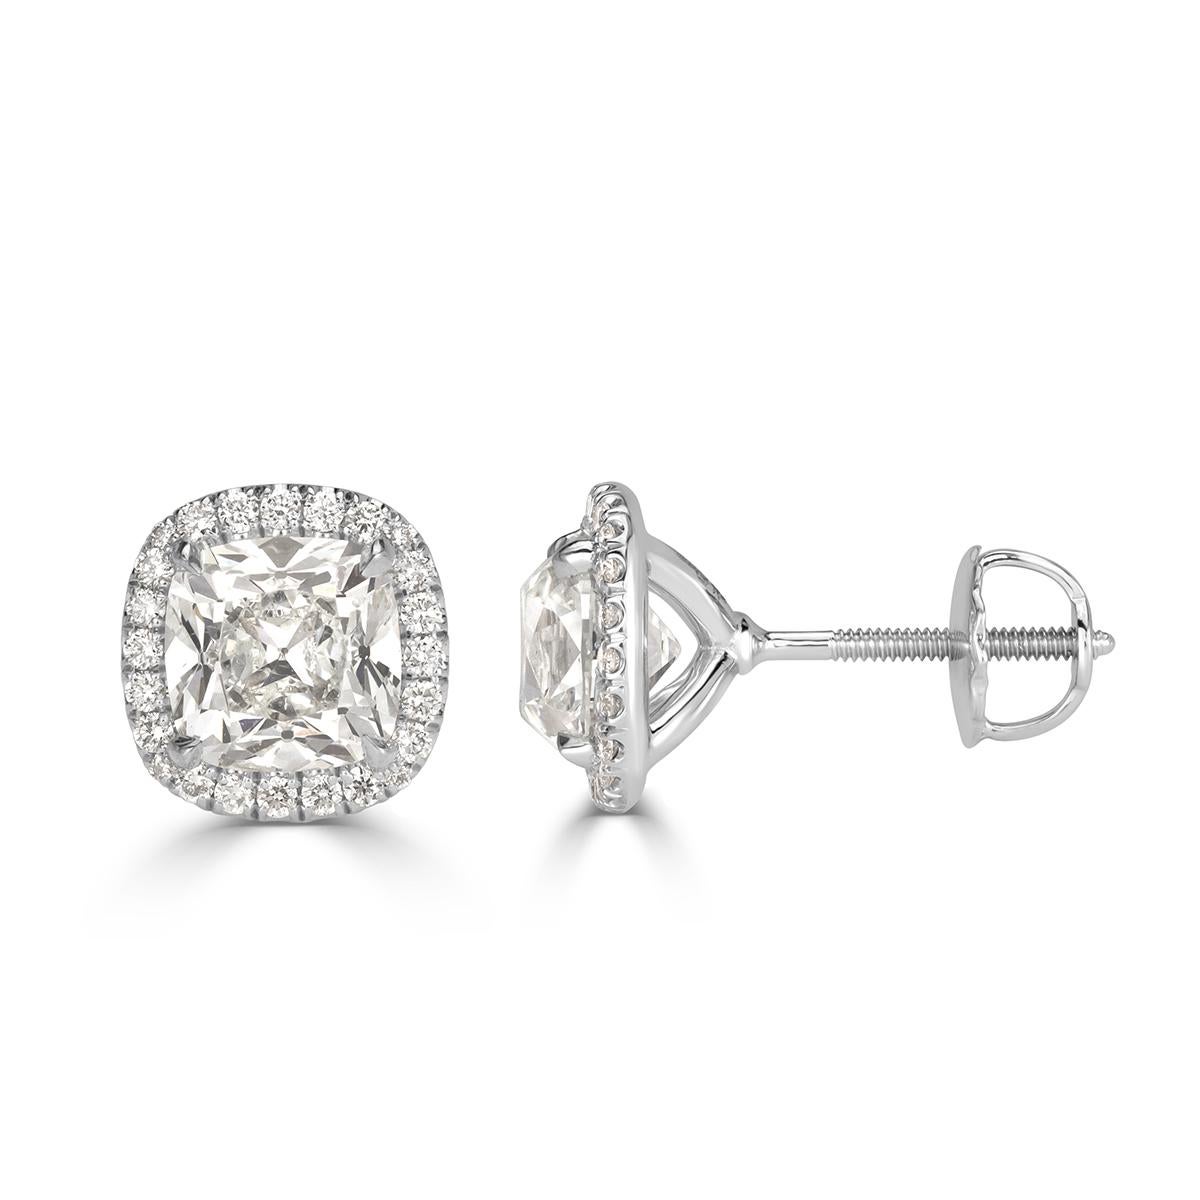 This gorgeous pair of diamond stud earrings showcases two old Mine cut center diamonds with a respective weight of 1.50ct each. They are both GIA certified at F in color, SI1- SI2 in clarity and accented by a shimmering halo of smaller round